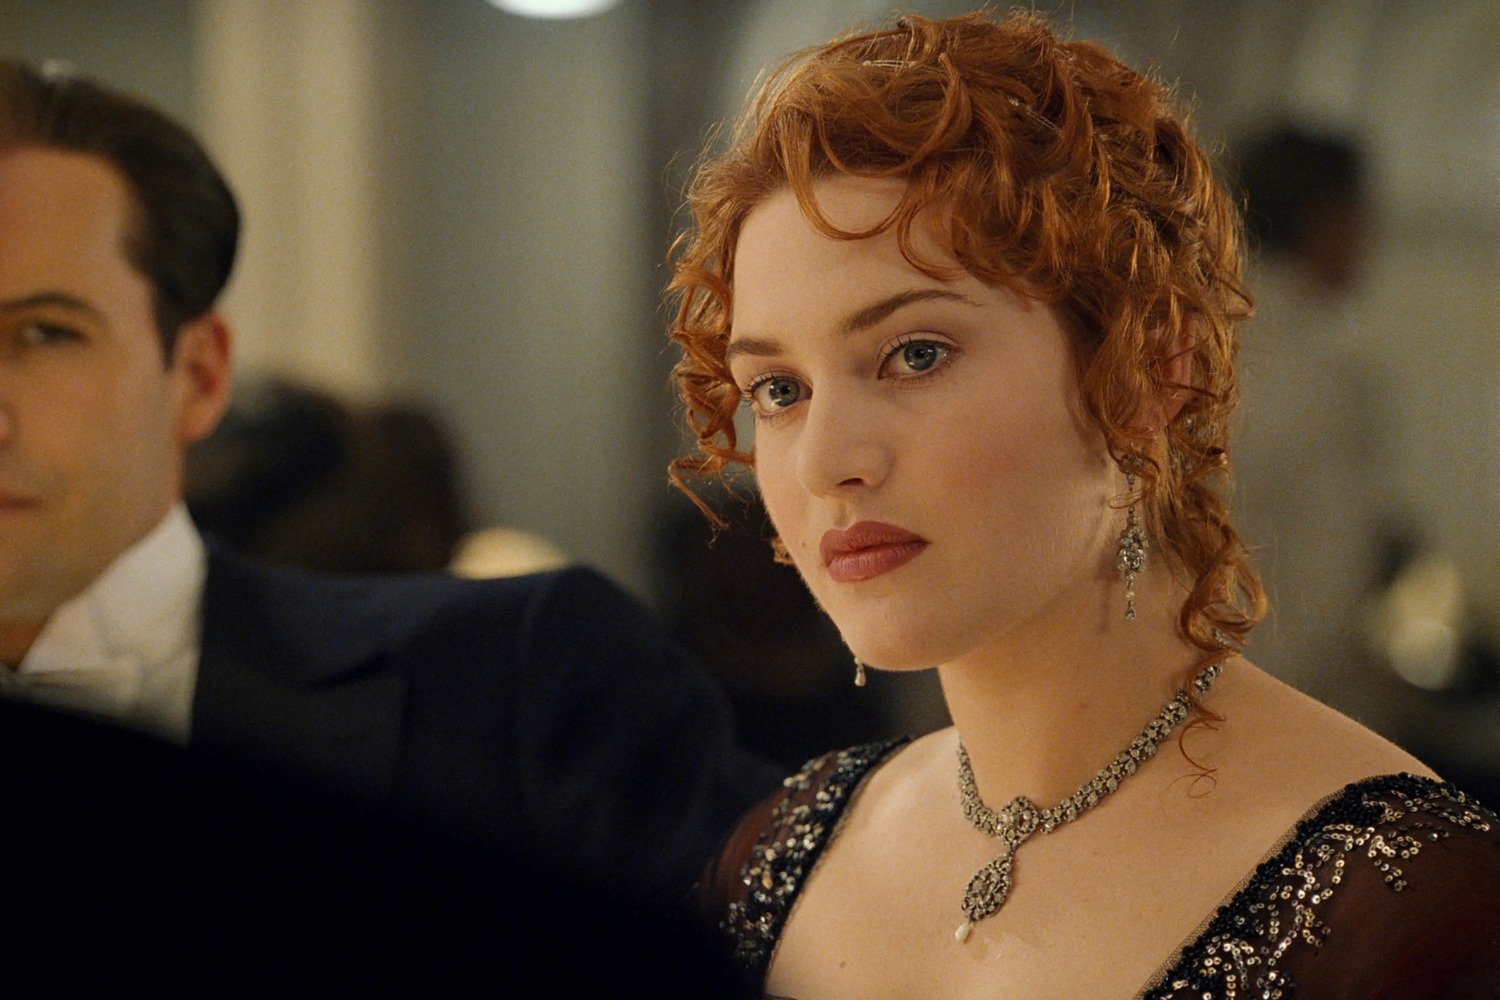 Shocking Age Difference Revealed: Kate Winslet's Real Age Vs. Her Character's Age In 'Titanic'